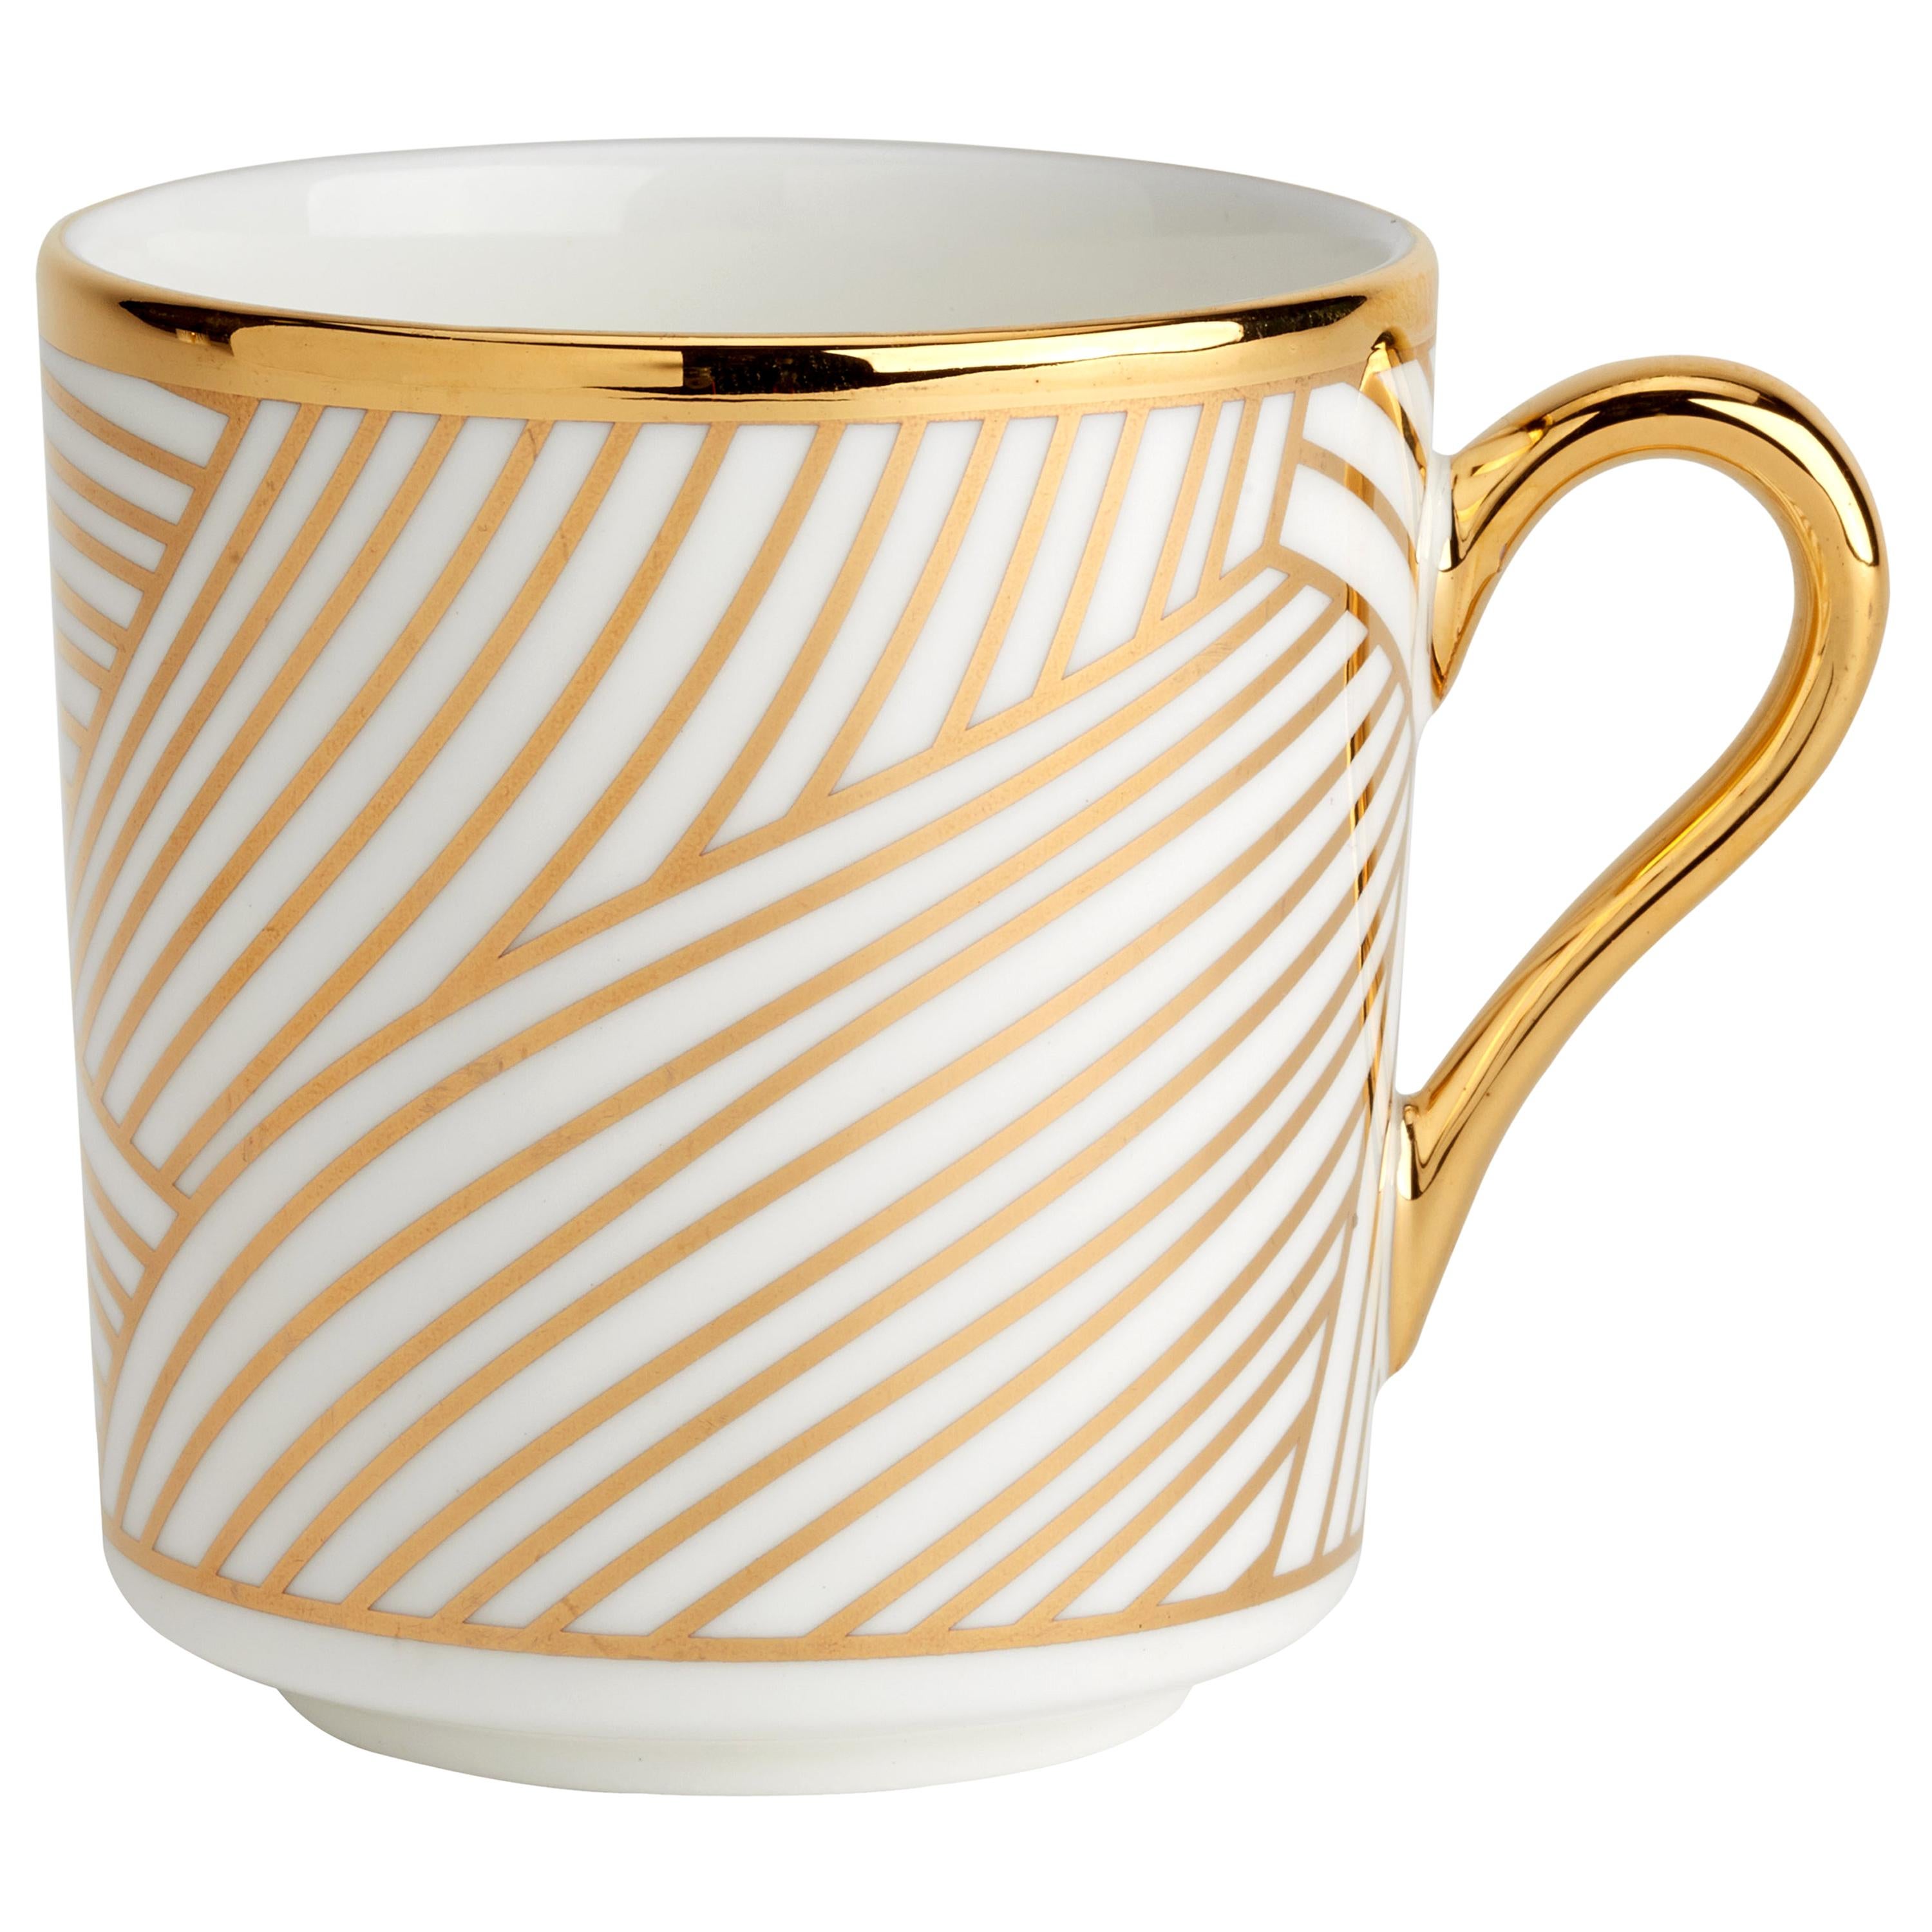 Bone China Espresso Cup with 22-Carat Gold and Black Decals For Sale